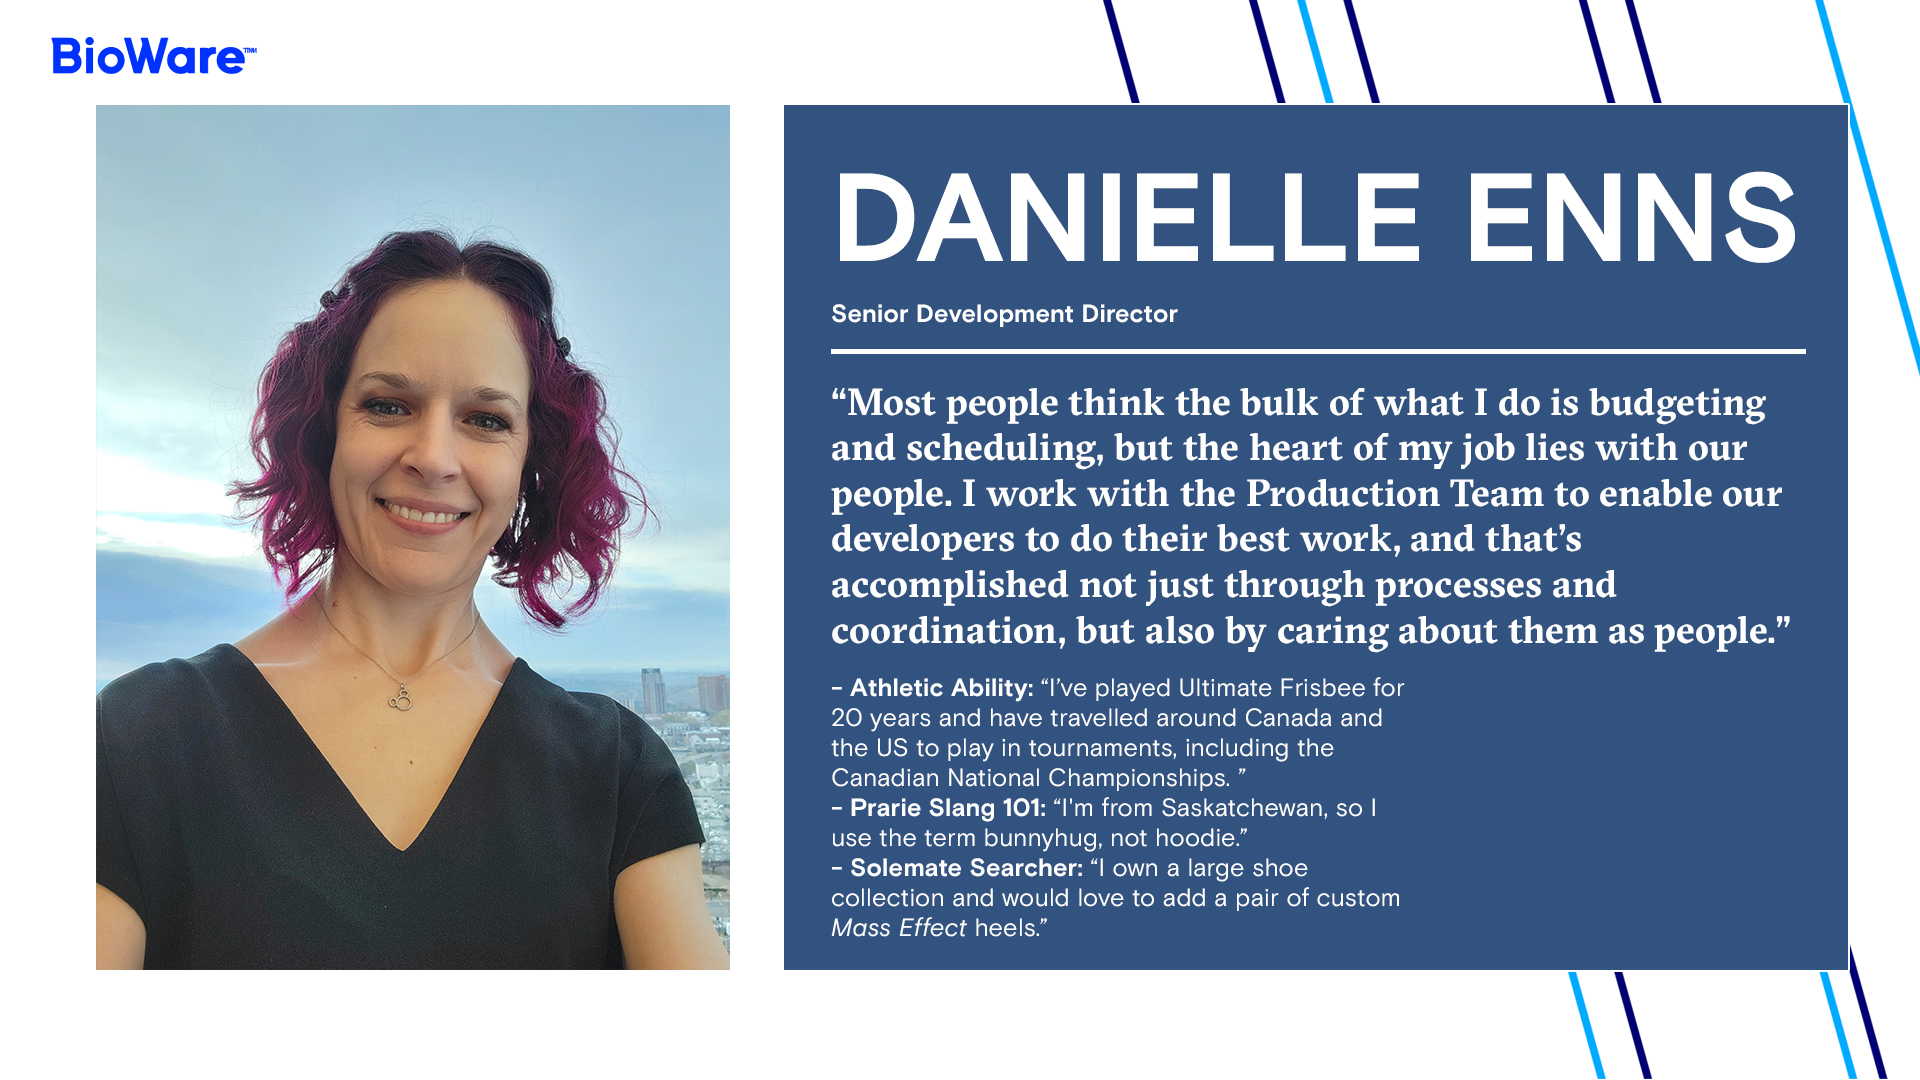 DANIELLE ENNS Senior Development Director  “Most people think the bulk of what I do is budgeting and scheduling, but the heart of my job lies with our people. I work with the Production Team to enable our developers to do their best work, and that’s accomplished not just through processes and coordination, but also by caring about them as people.”  - Athletic Ability: “I’ve played Ultimate Frisbee for 20 years and have travelled around Canada and the US to play in tournaments, including the Canadian National Championships. ” - Prarie Slang 101: “I'm from Saskatchewan, so I use the term bunnyhug, not hoodie.” - Solemate Searcher: “I own a large shoe collection and would love to add a pair of custom Mass Effect heels.”